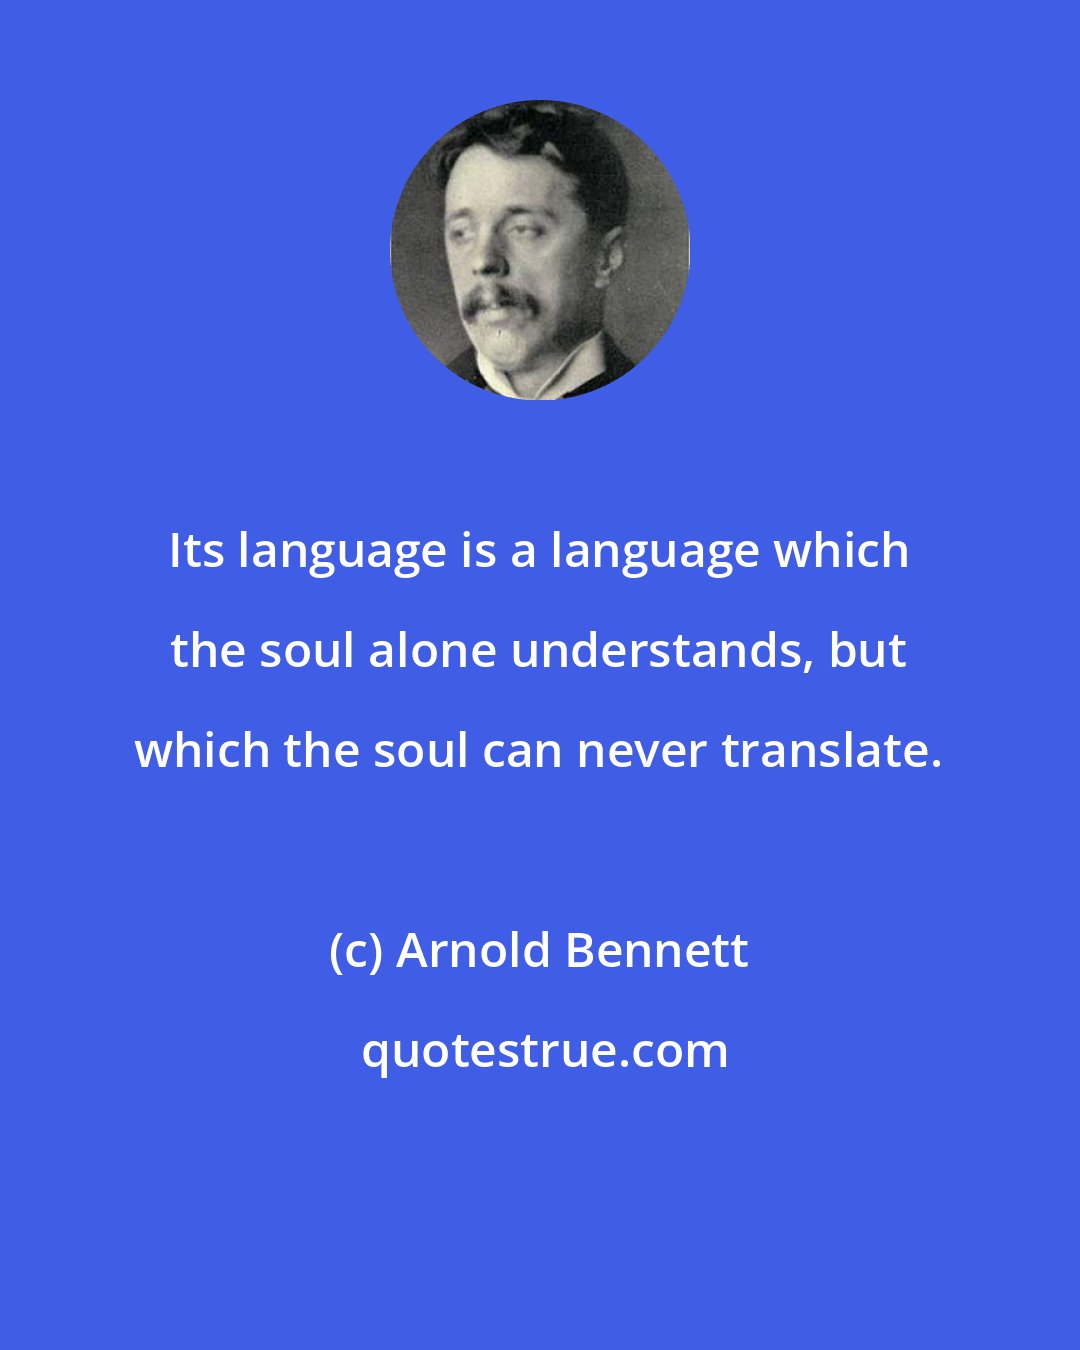 Arnold Bennett: Its language is a language which the soul alone understands, but which the soul can never translate.